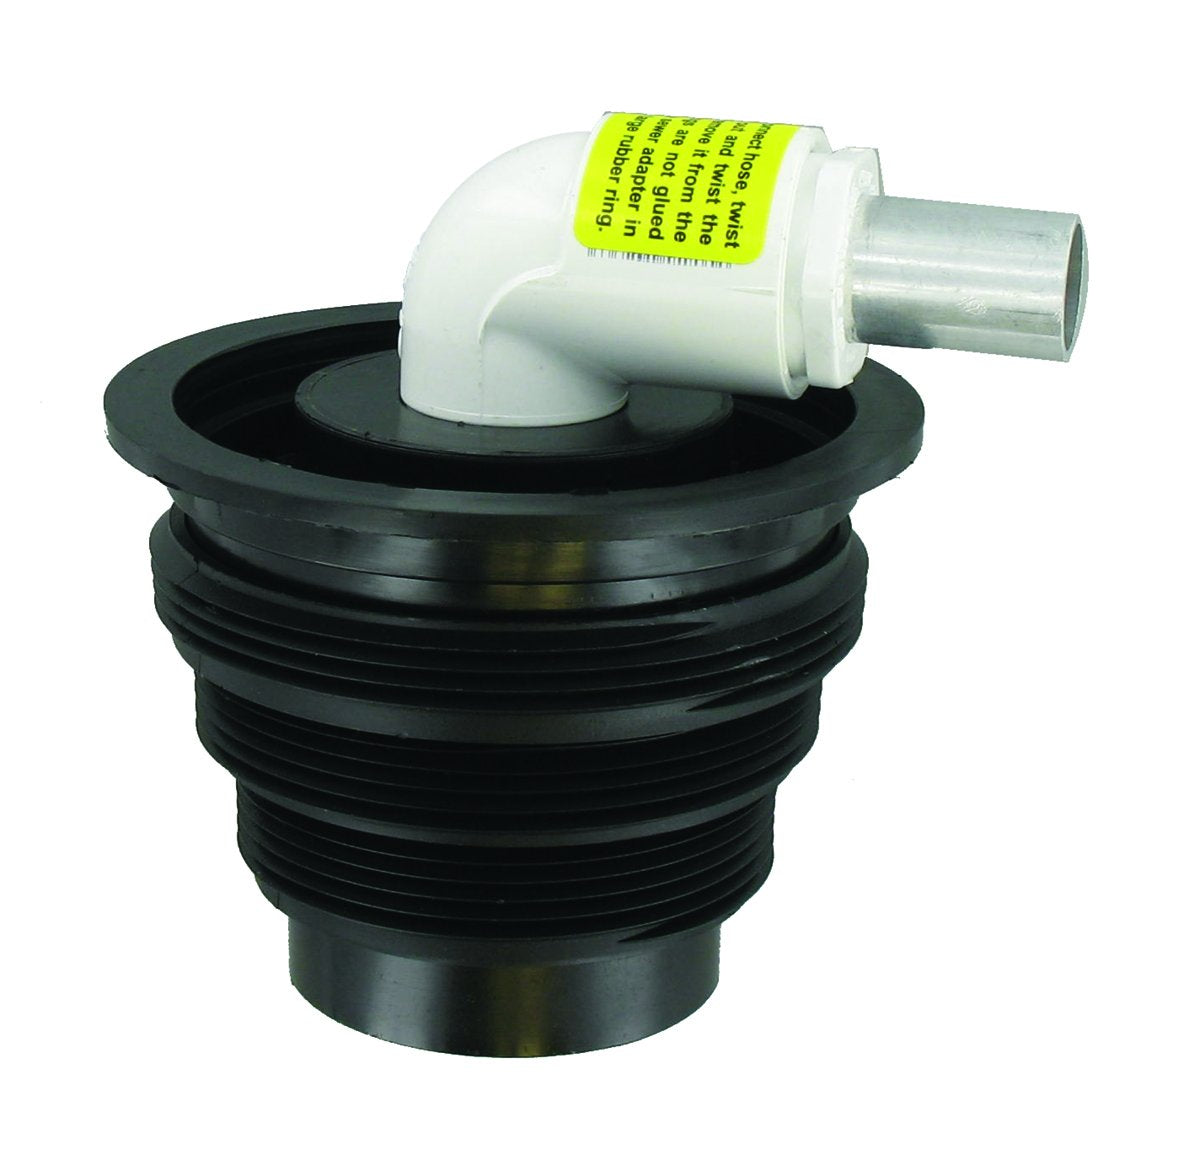 Valterra SS06 SewerSolution Sewer Adapter with 10' Hose